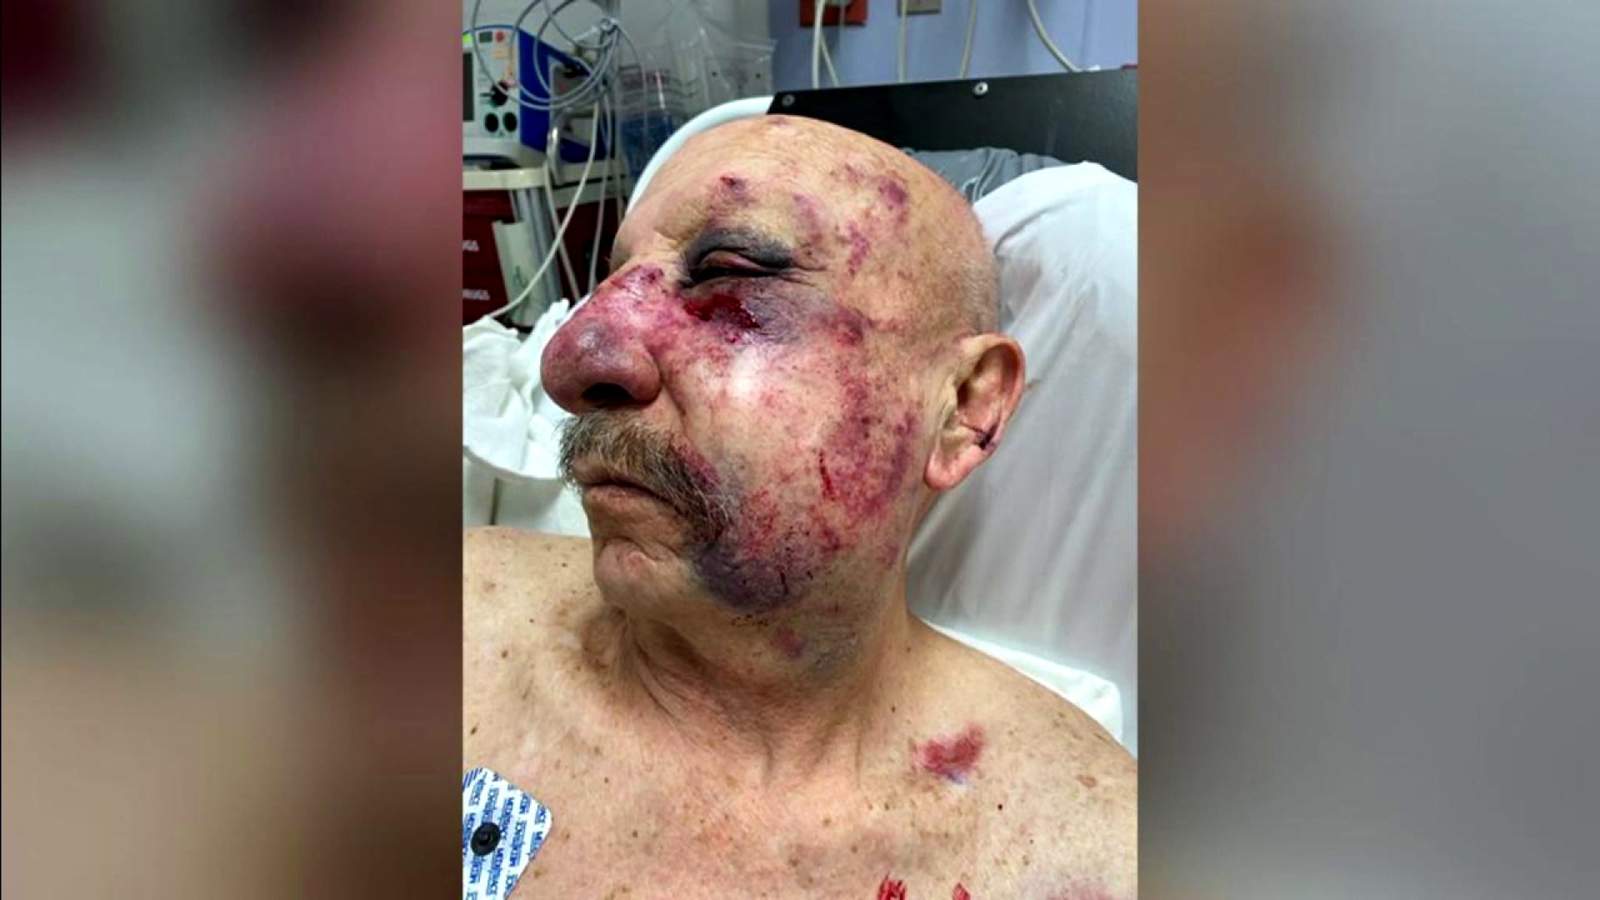 Family of elderly man attacked on Metromover suing Miami-Dade and security company